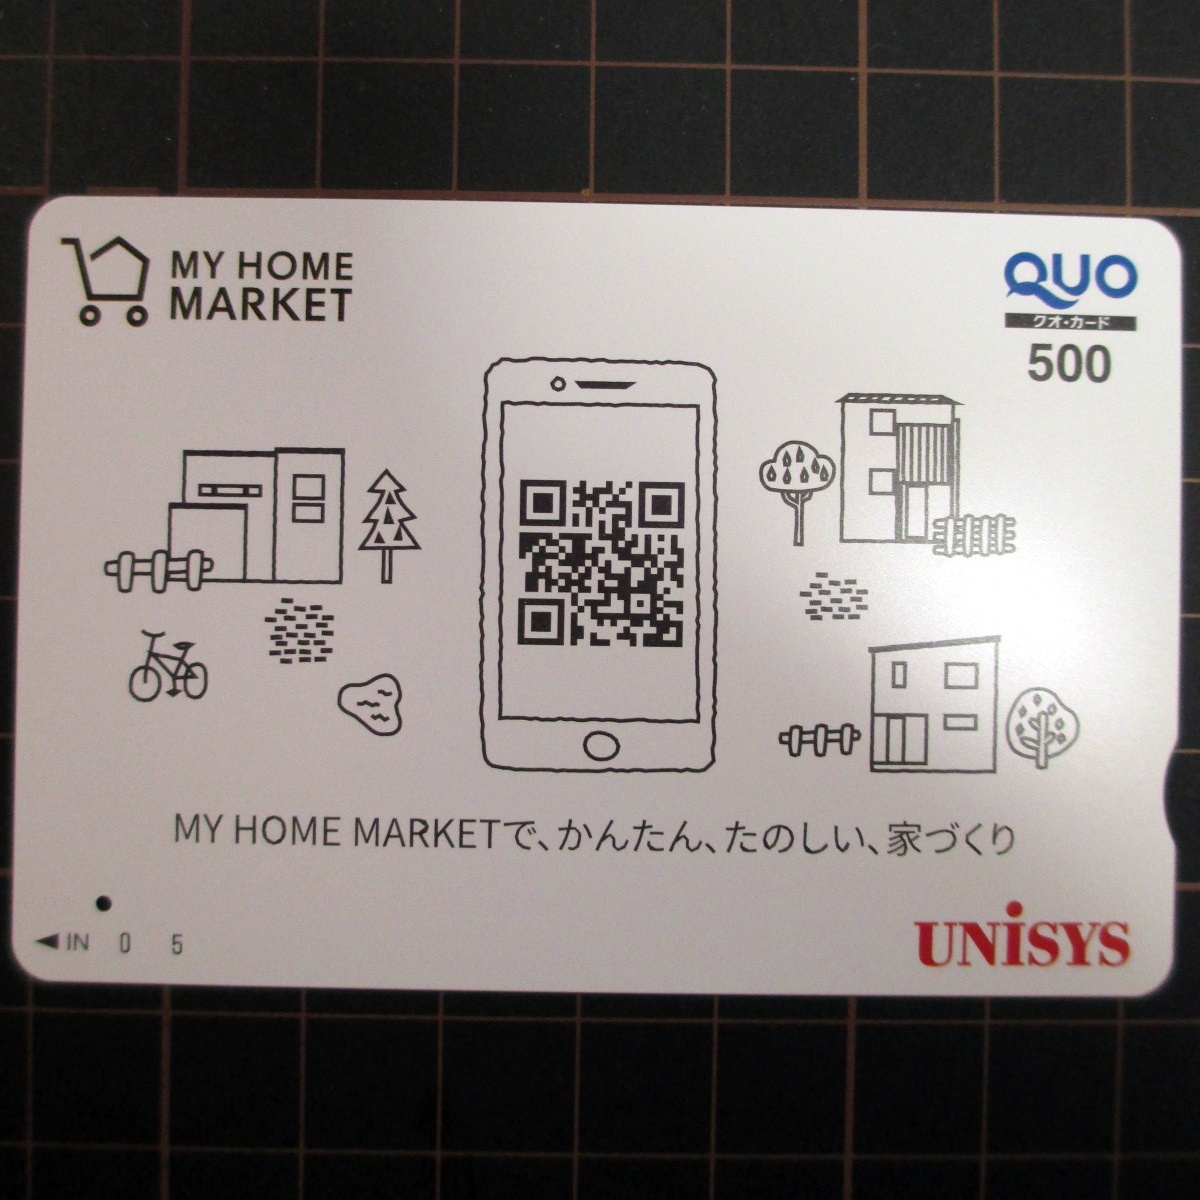 [ used ] Japan Uni sis my Home market QUO card 